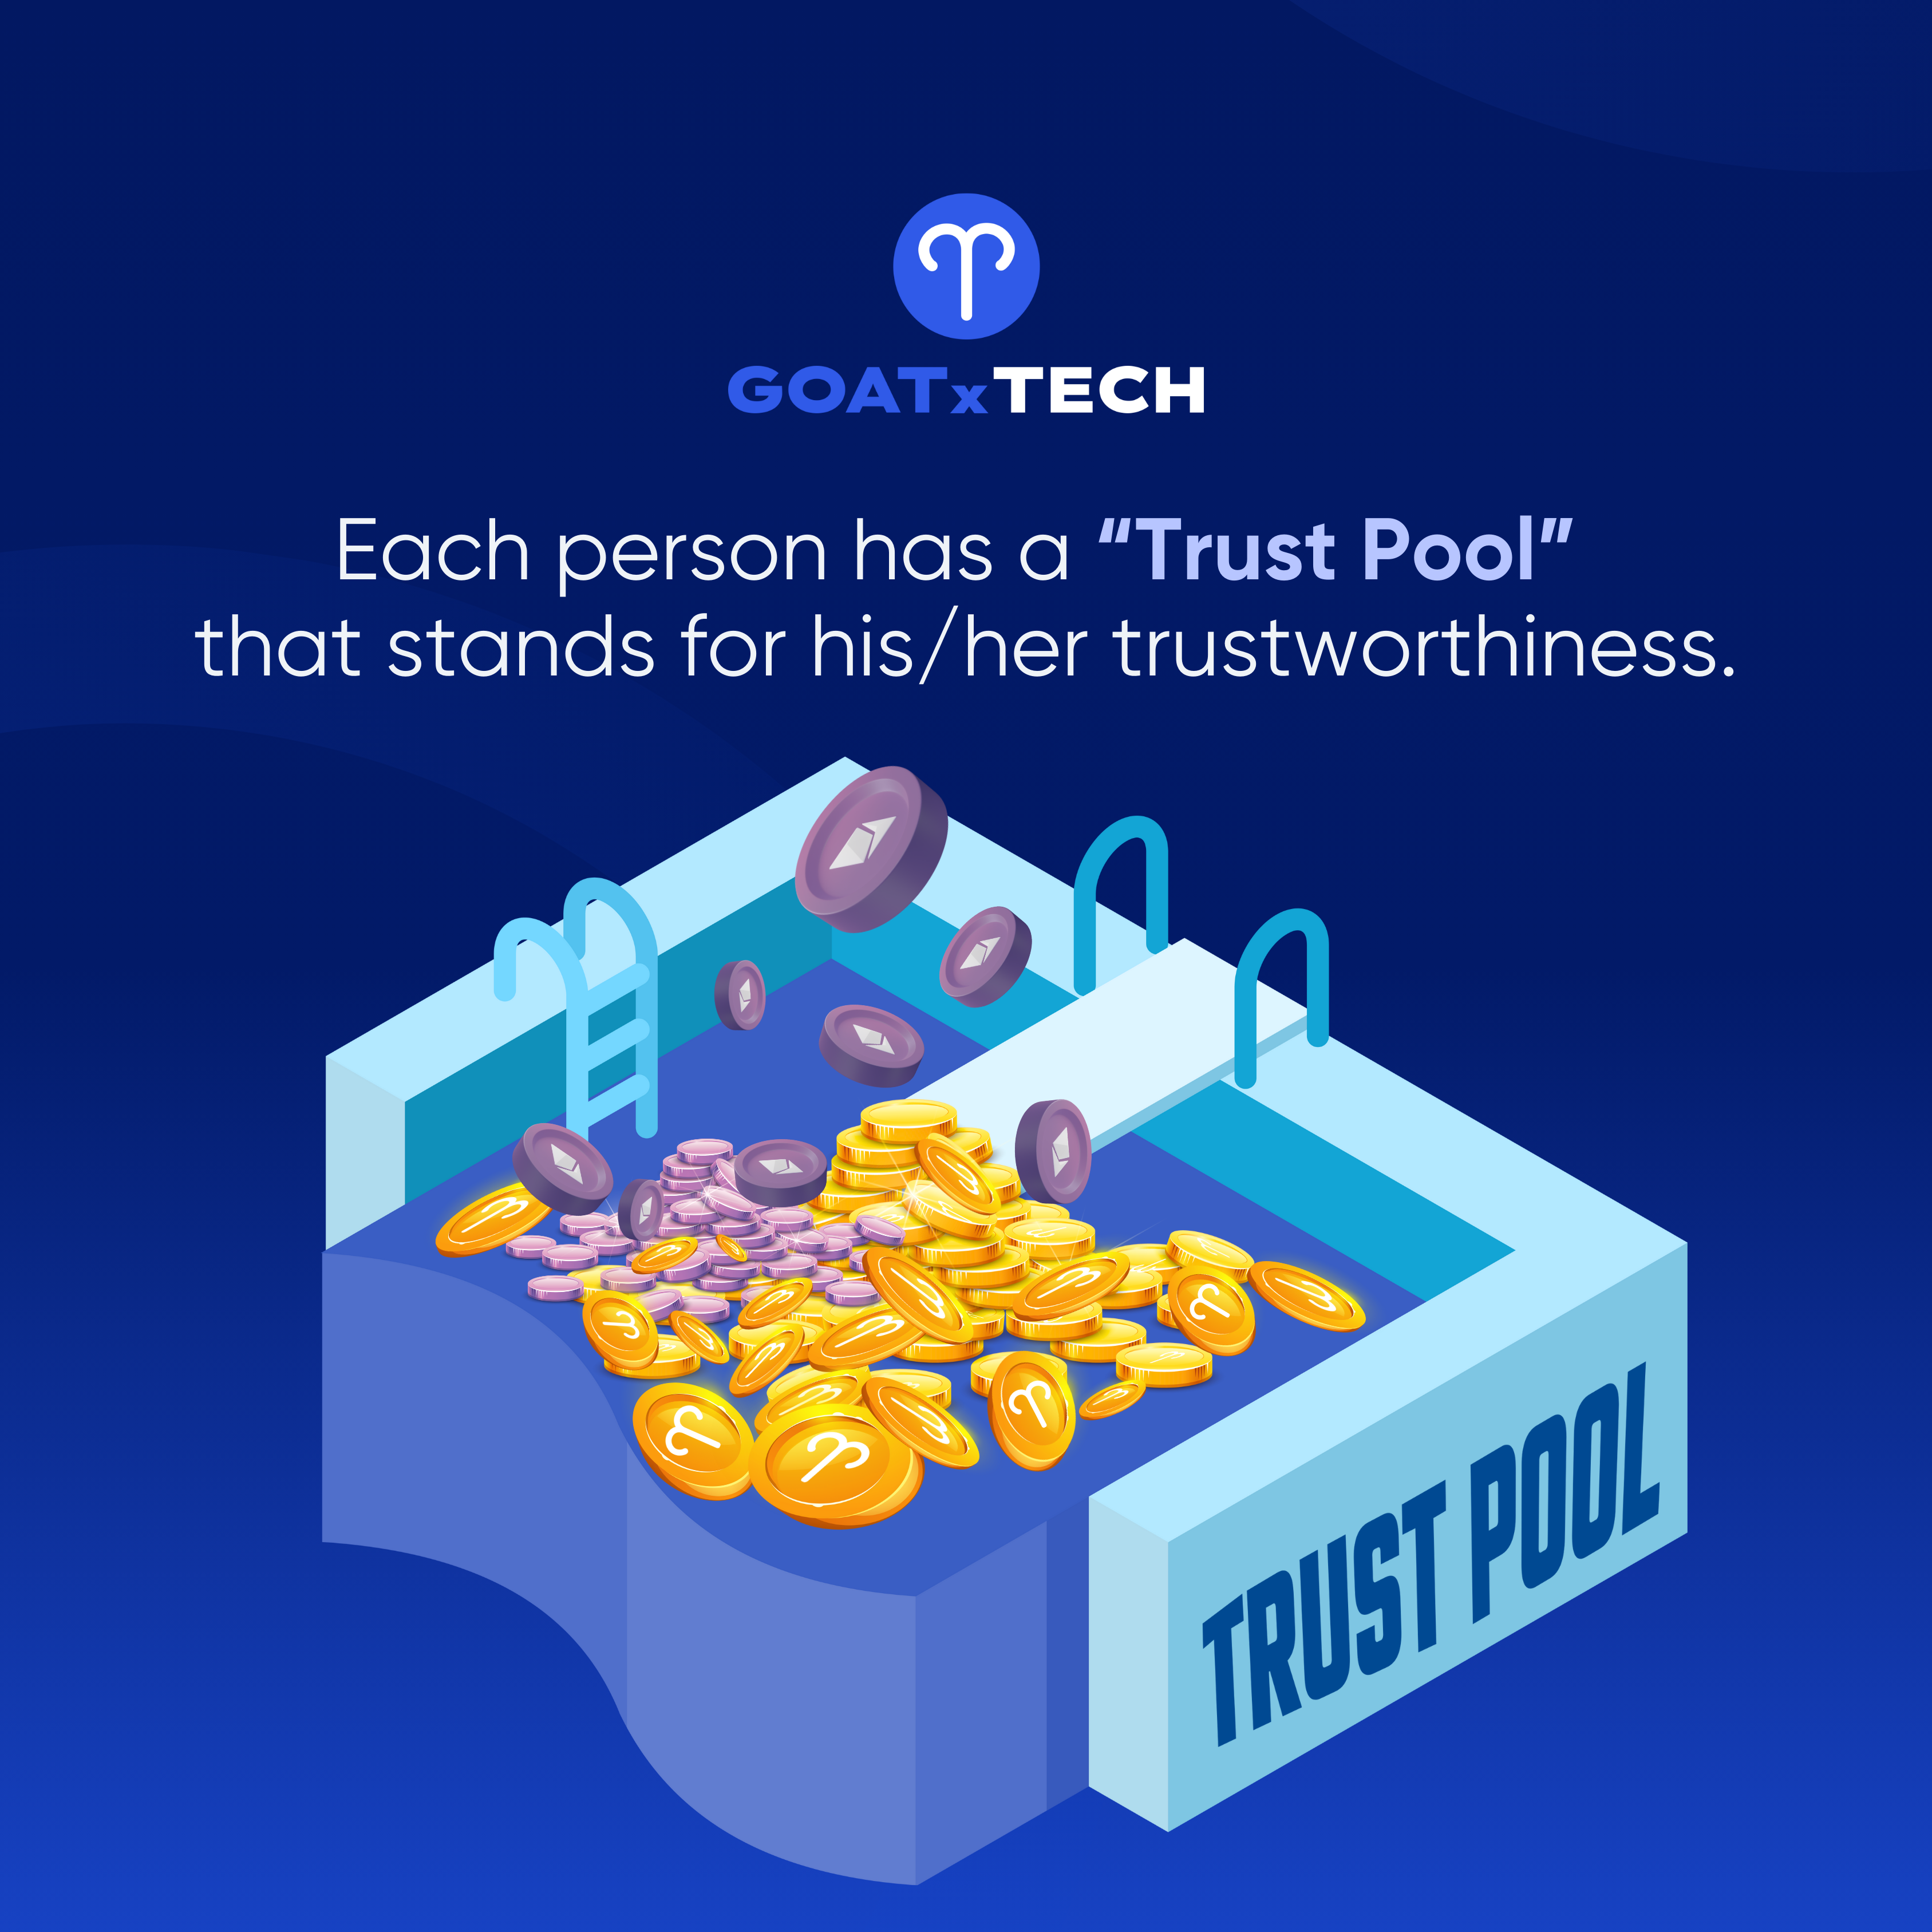 At Goat.Tech, each user has a Trust Pool, stands for his/her trustworthiness